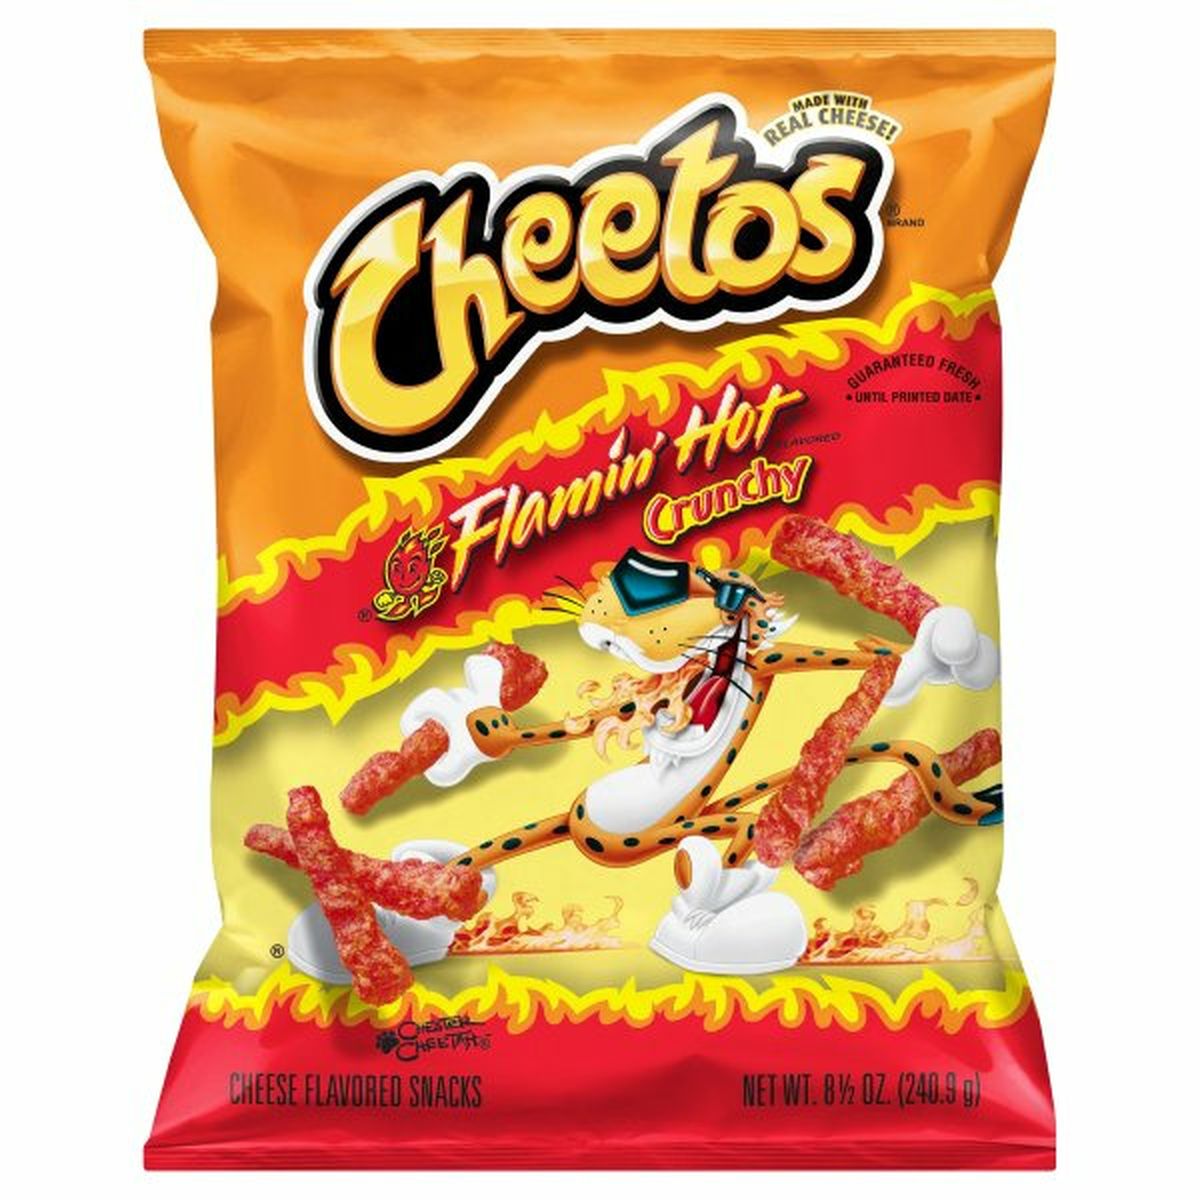 Calories in CHEETOS Crunchy Snack Mix, Hot